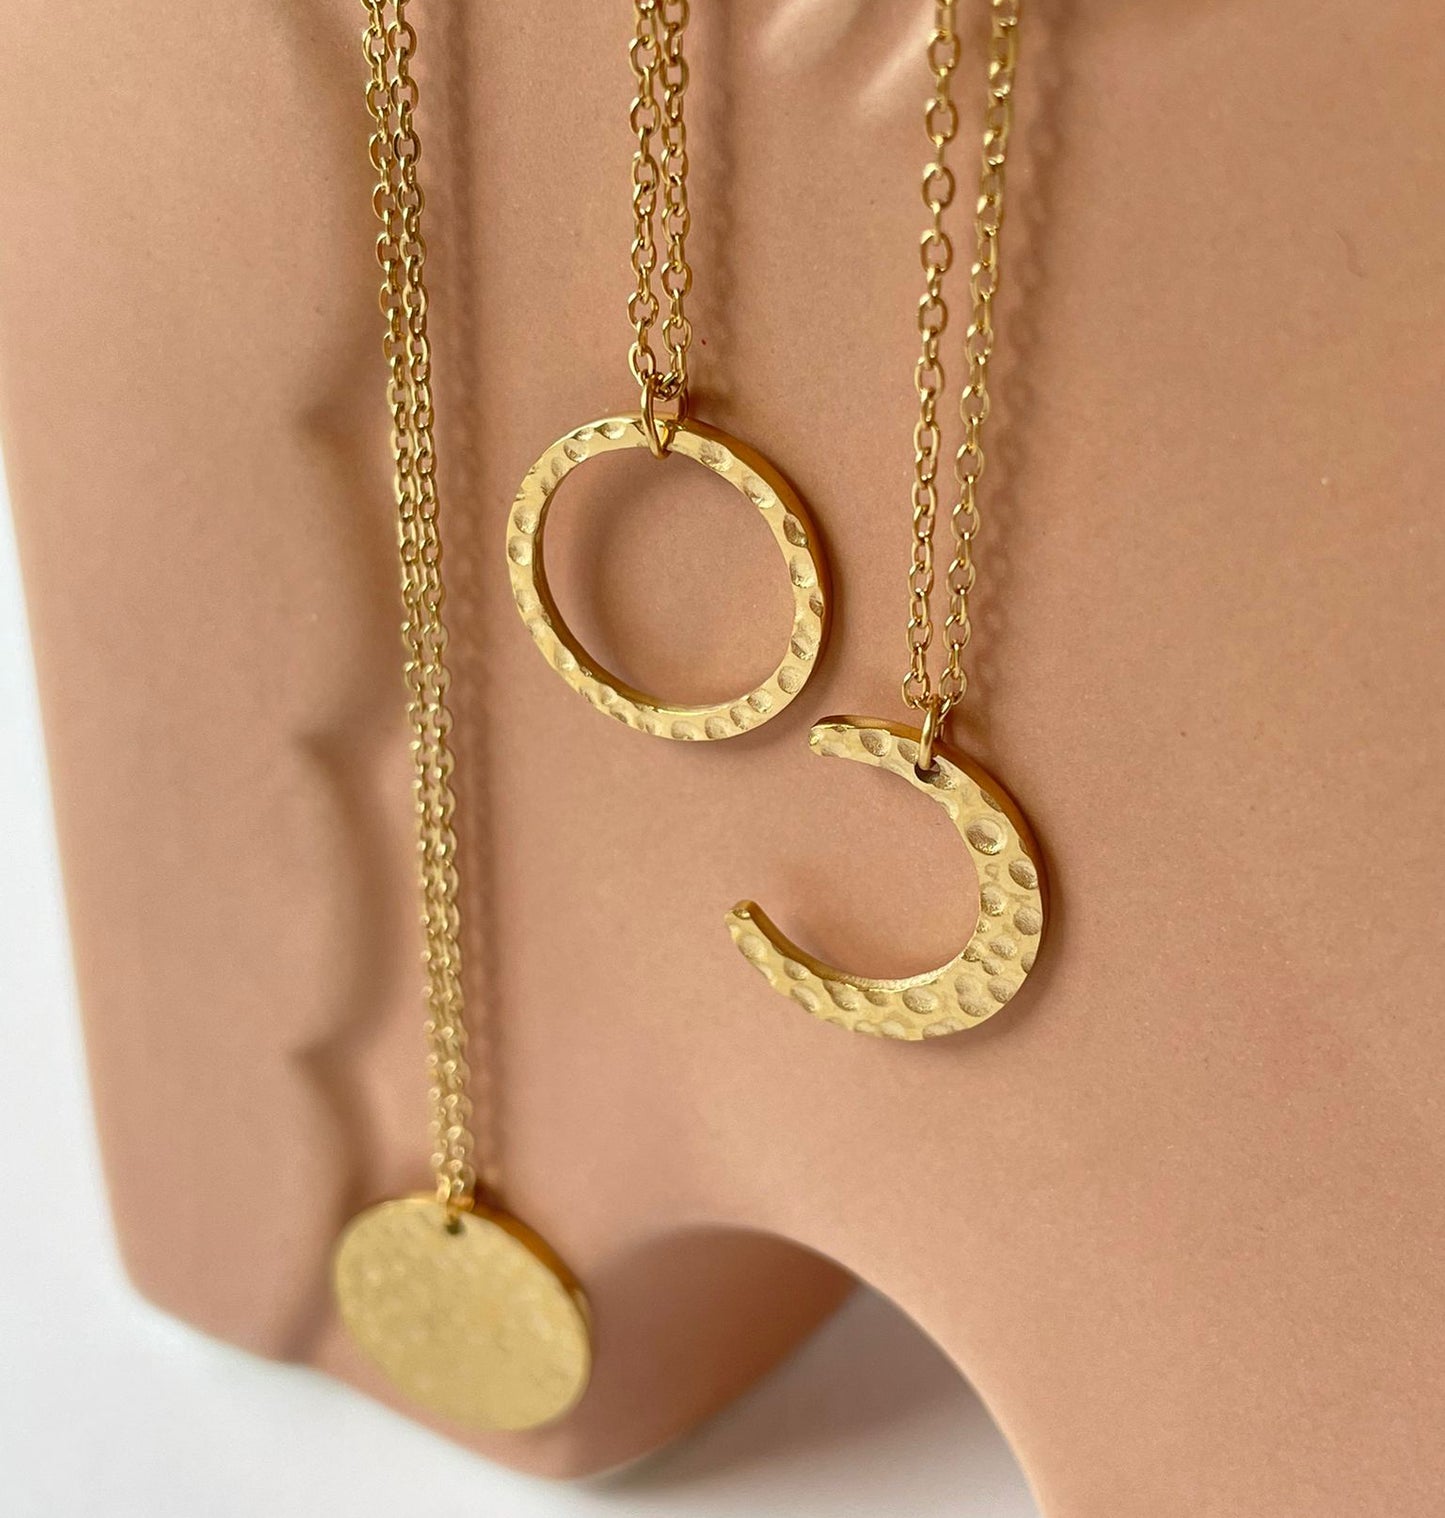 Lunar Phases Necklaces